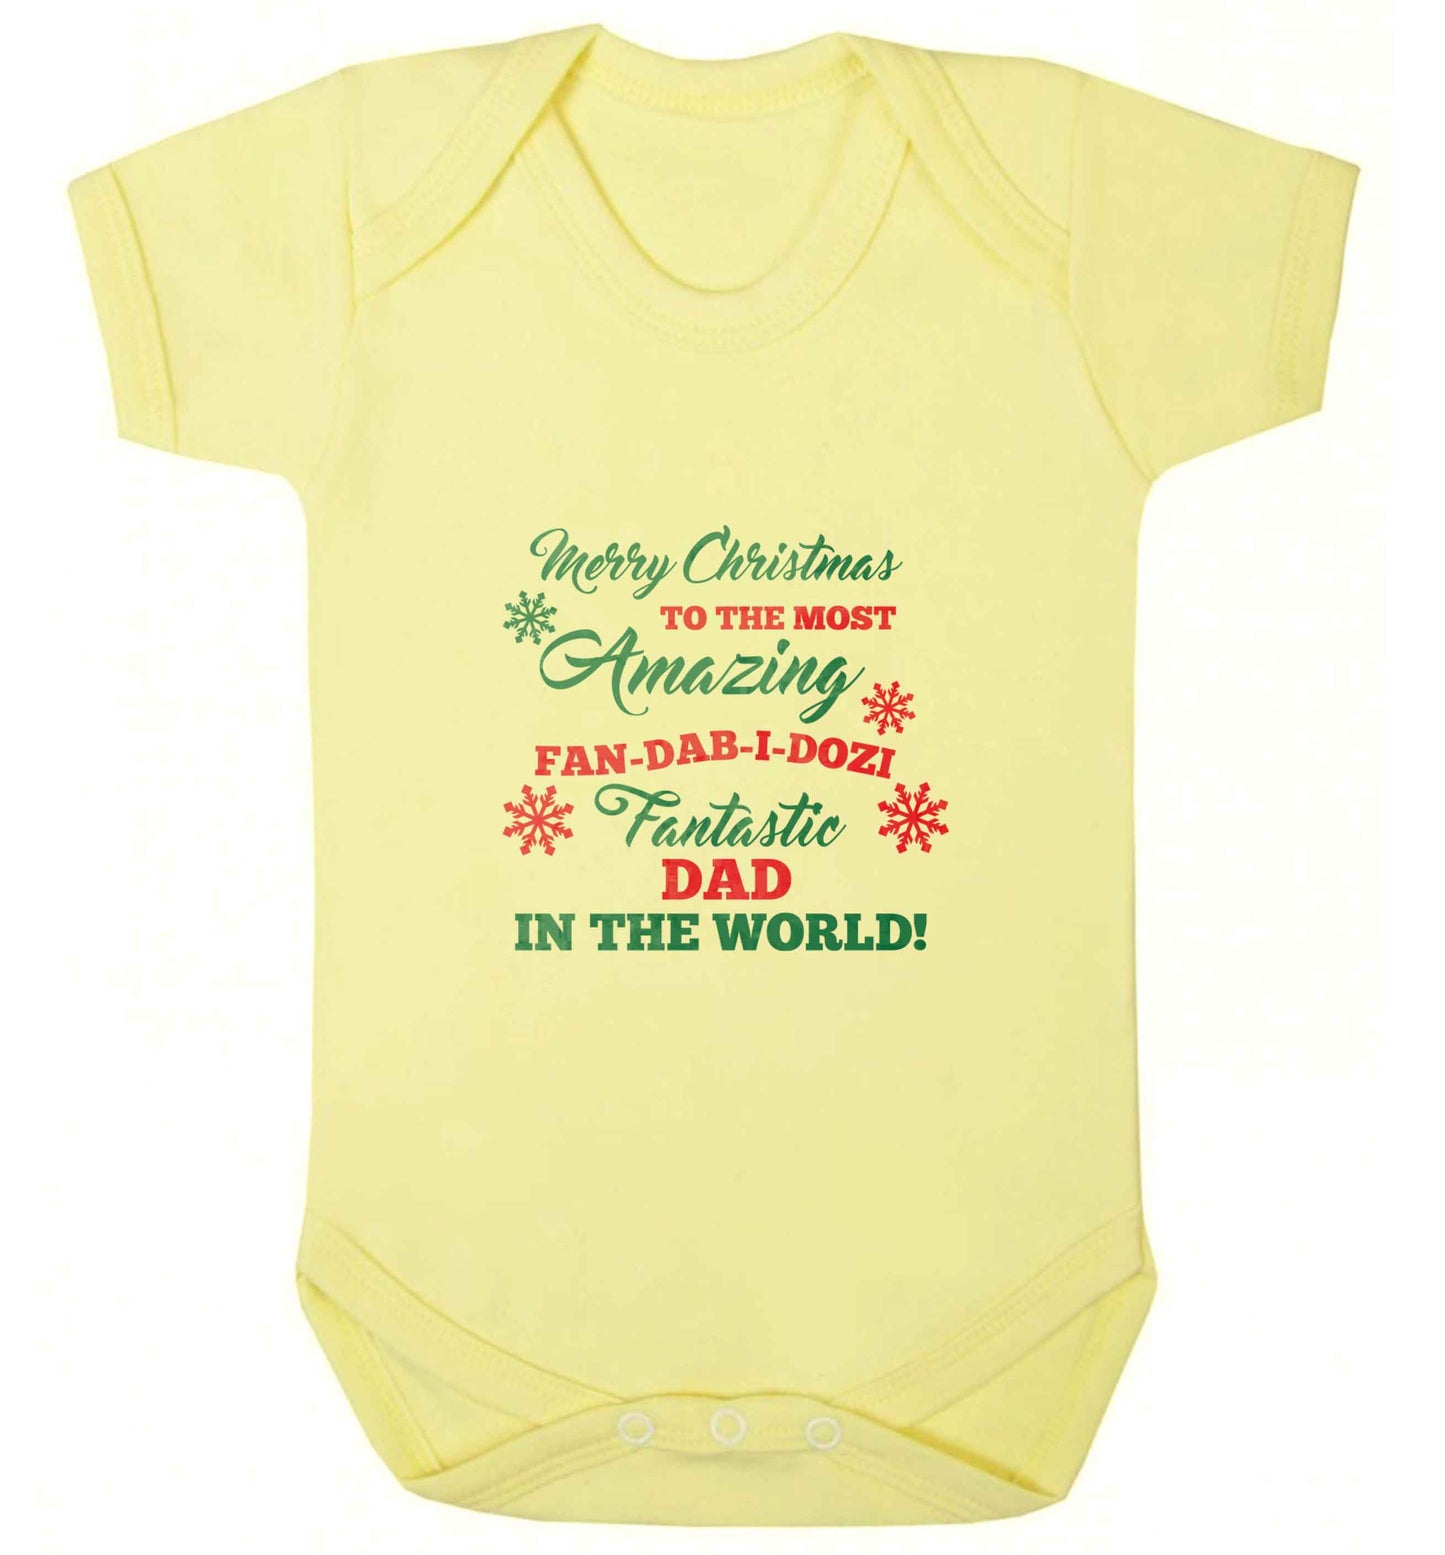 Merry Christmas to the most amazing fan-dab-i-dozi fantasic Dad in the world baby vest pale yellow 18-24 months